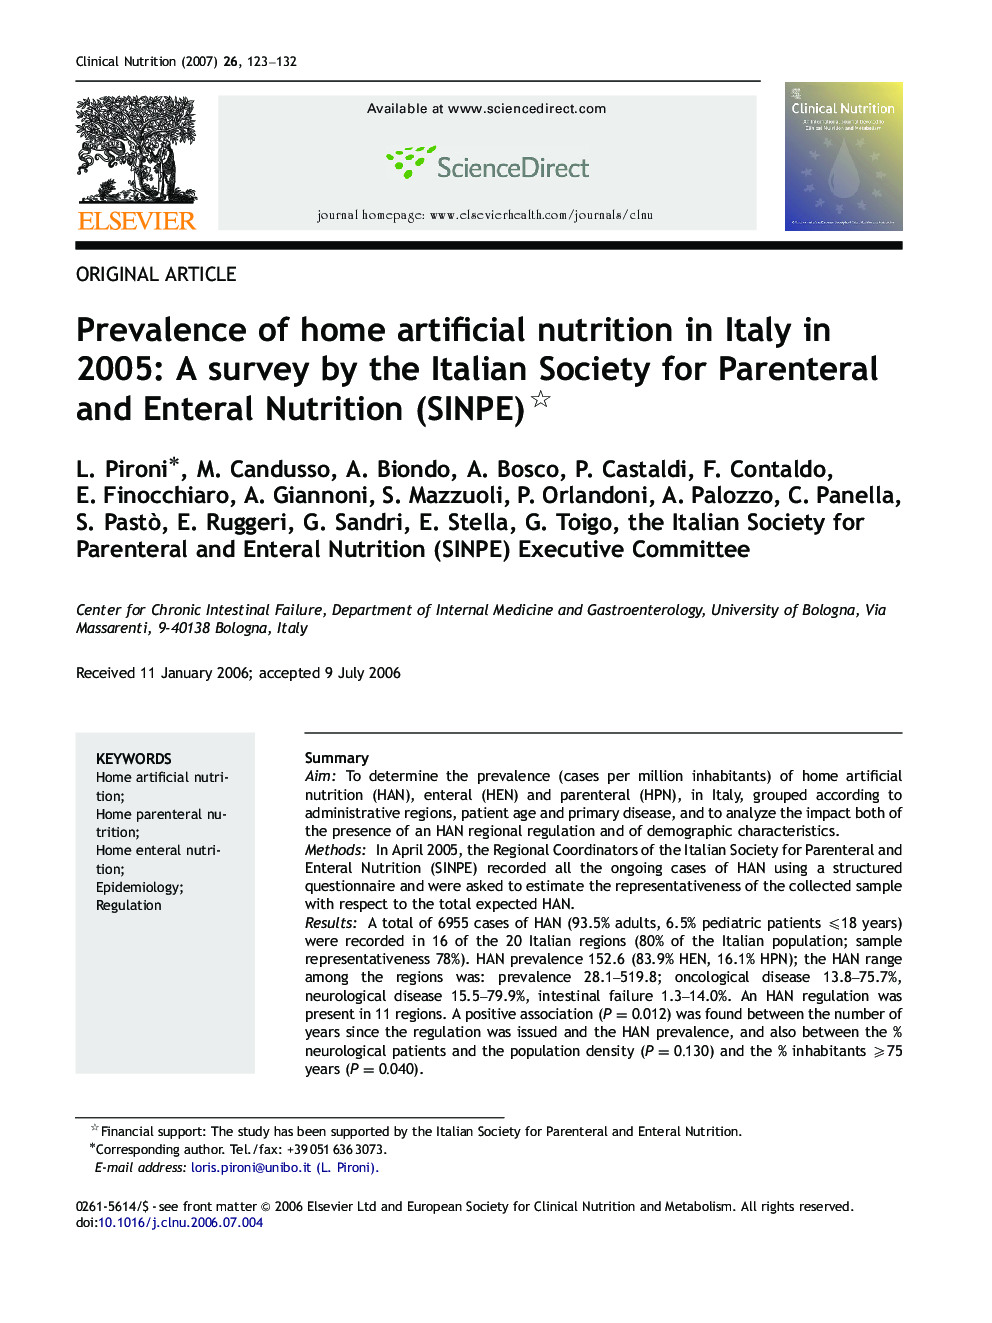 Prevalence of home artificial nutrition in Italy in 2005: A survey by the Italian Society for Parenteral and Enteral Nutrition (SINPE) 